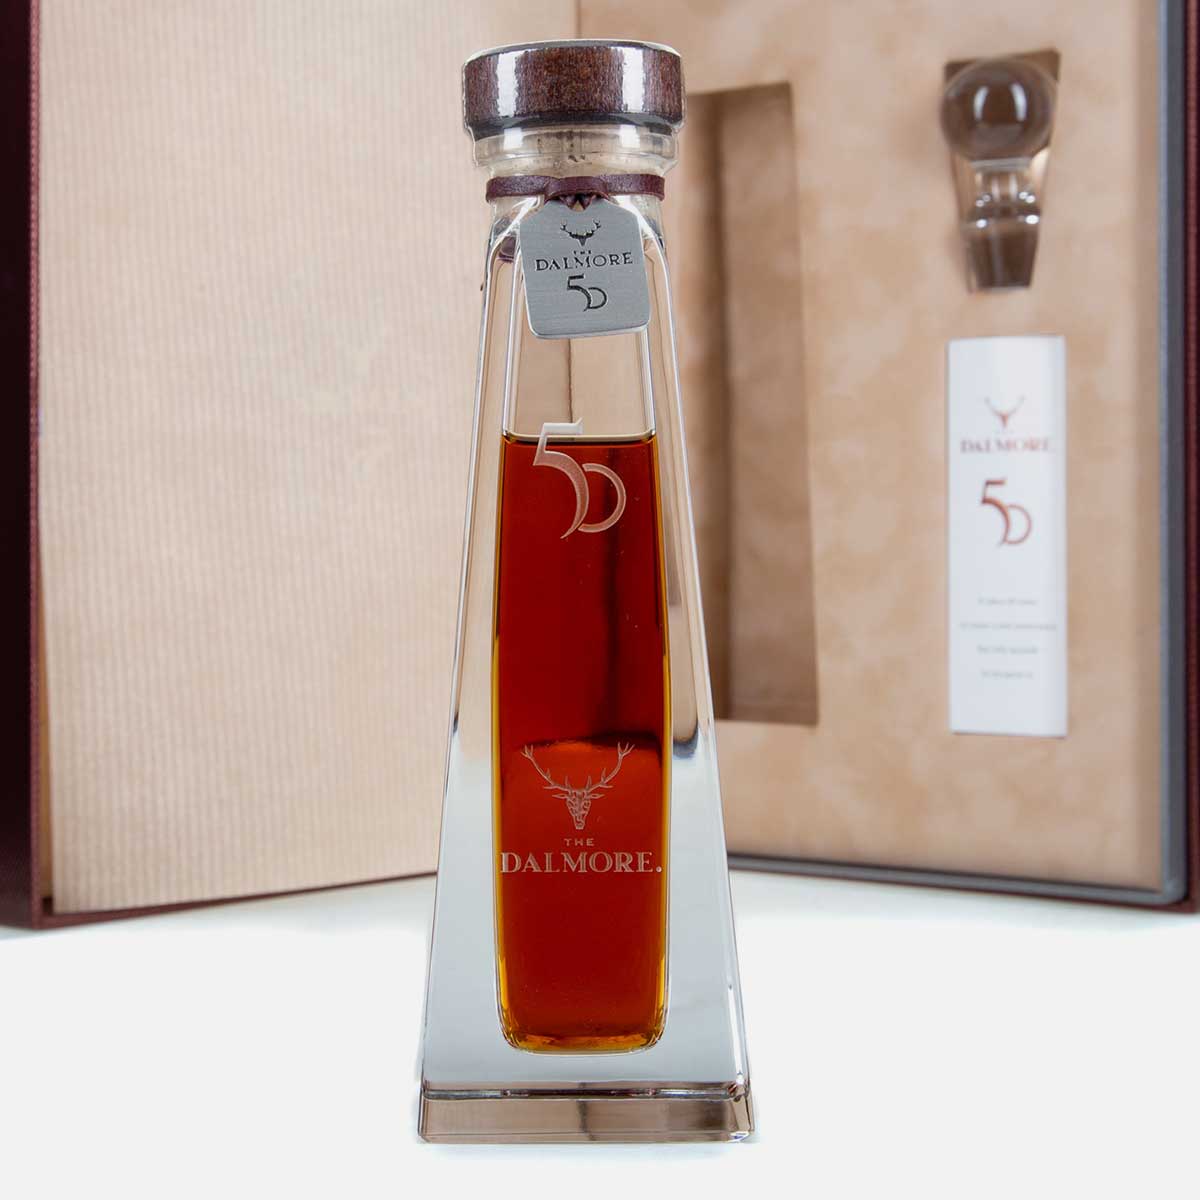 50 year-old Dalmore